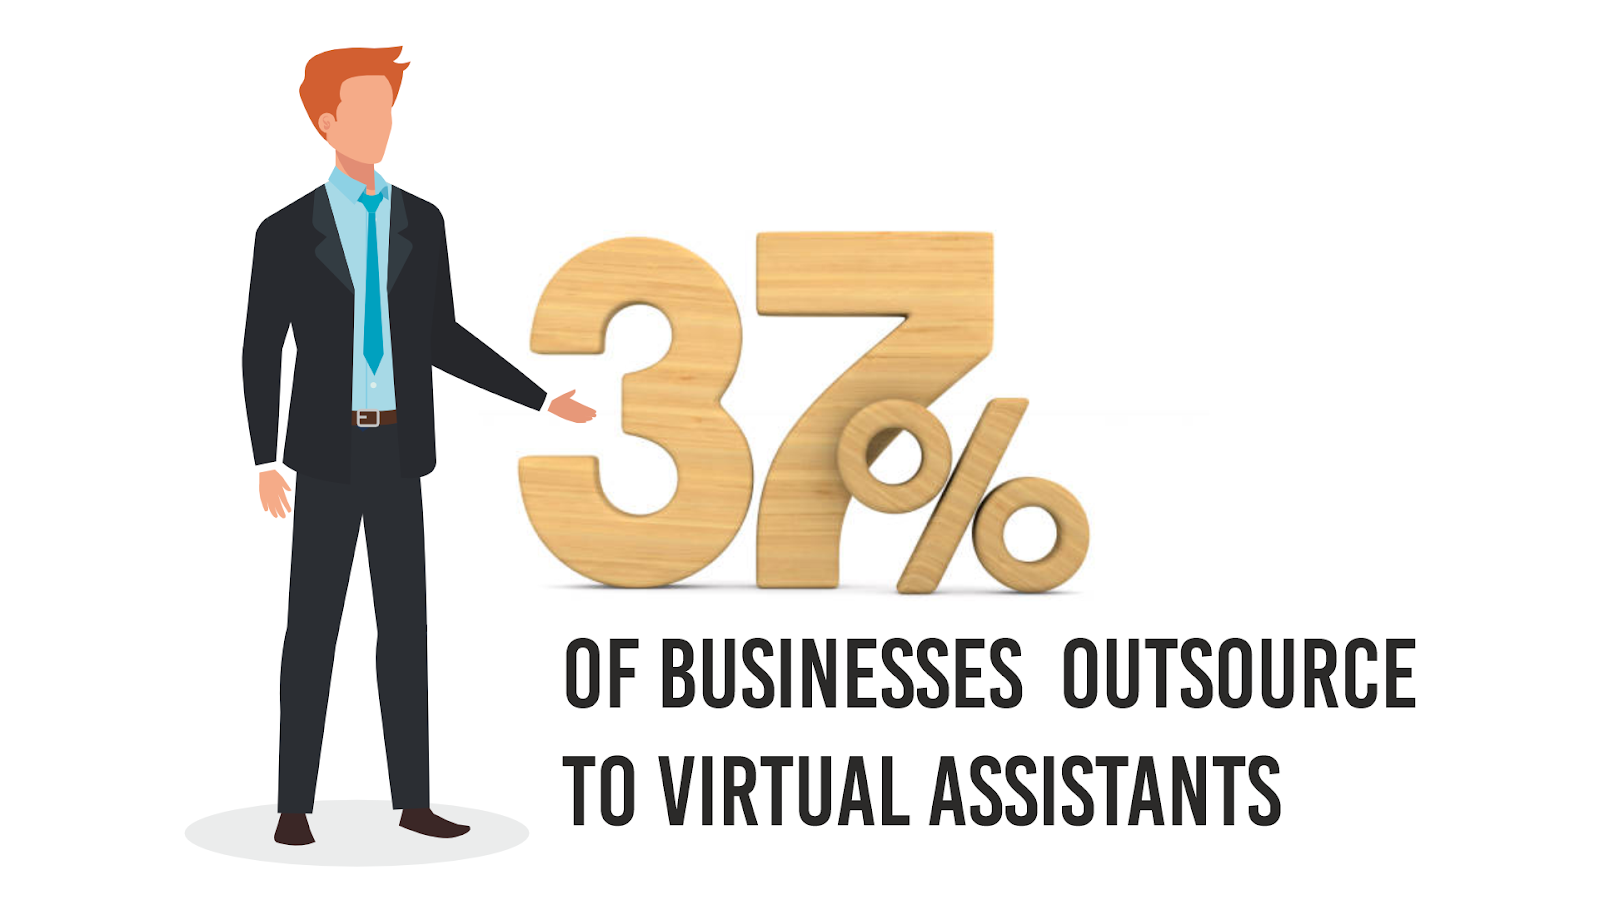 37% of businesses outsource to virtual assistants